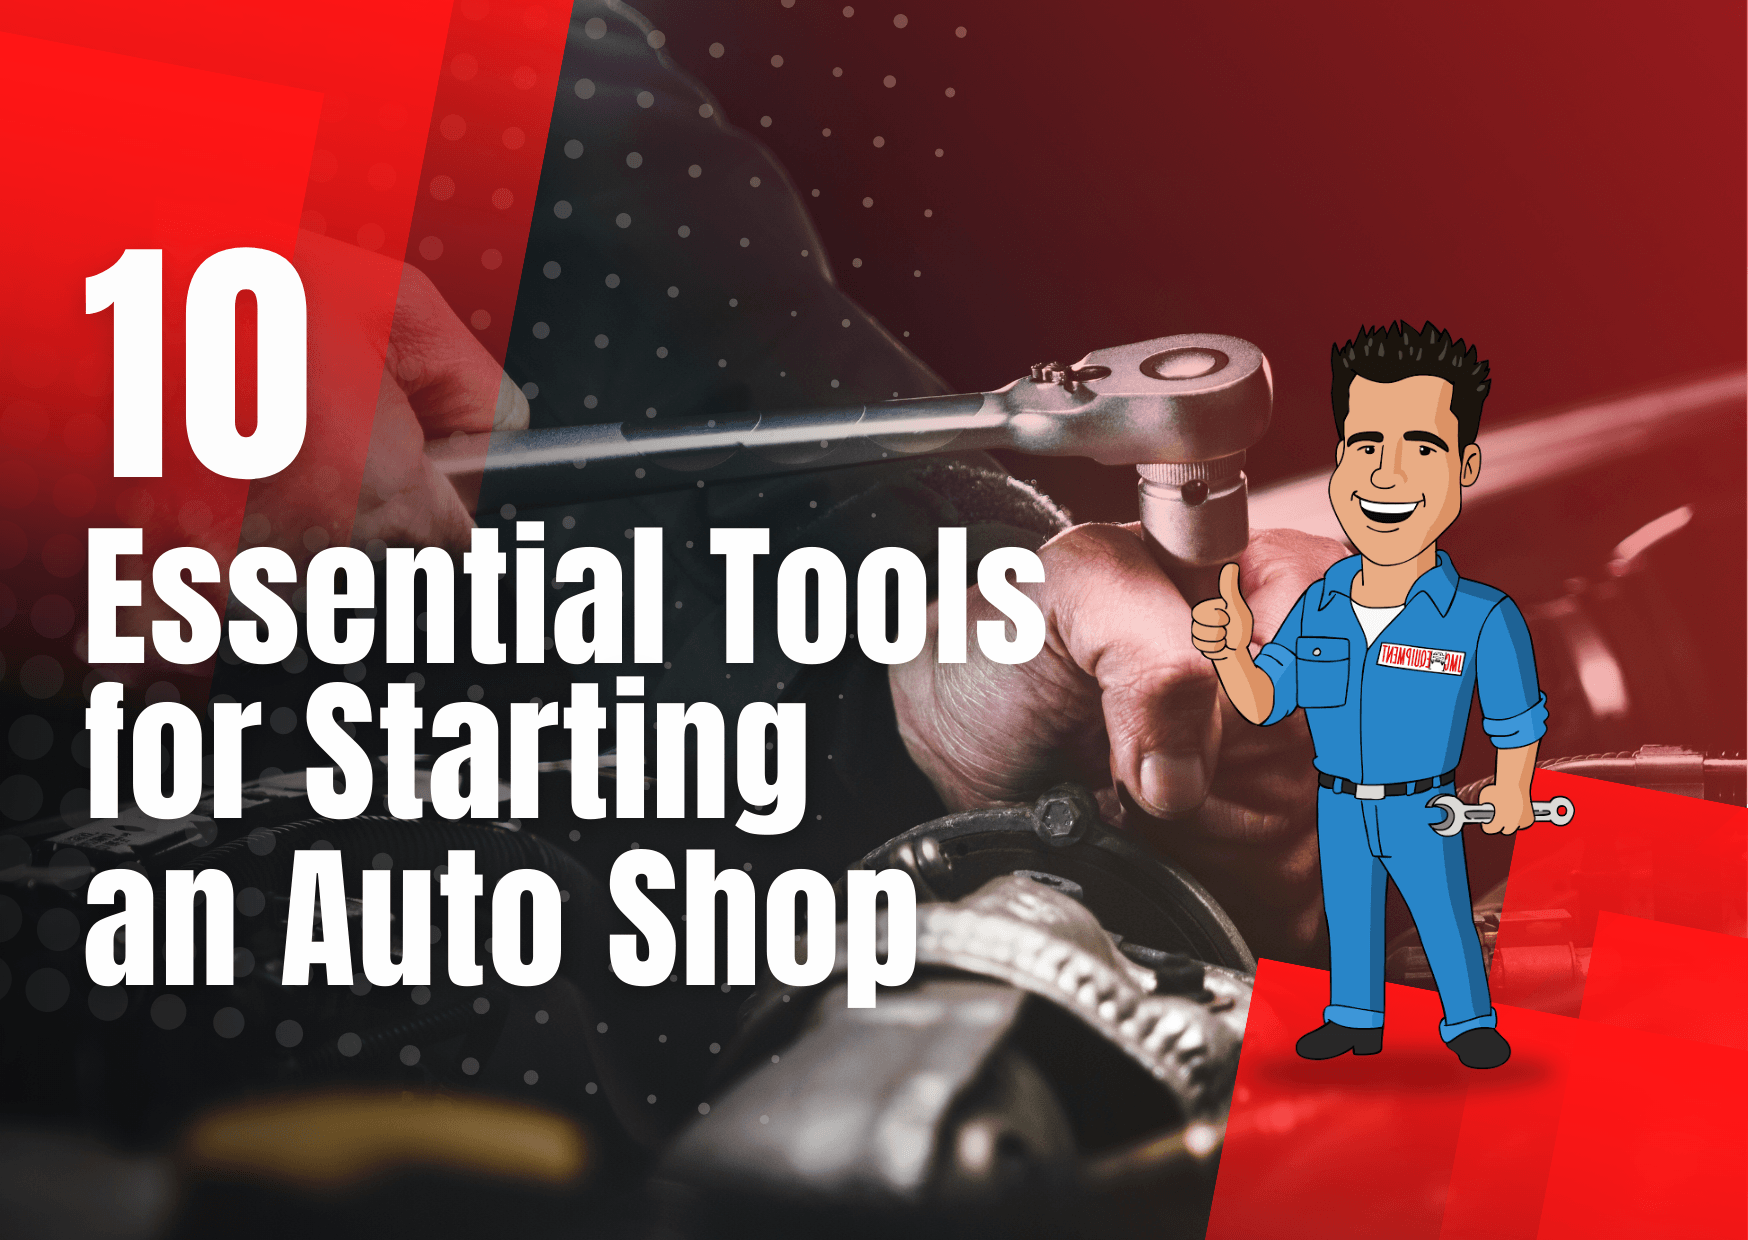 Opening a Wheel Service Shop? Get These Tools and Equipment